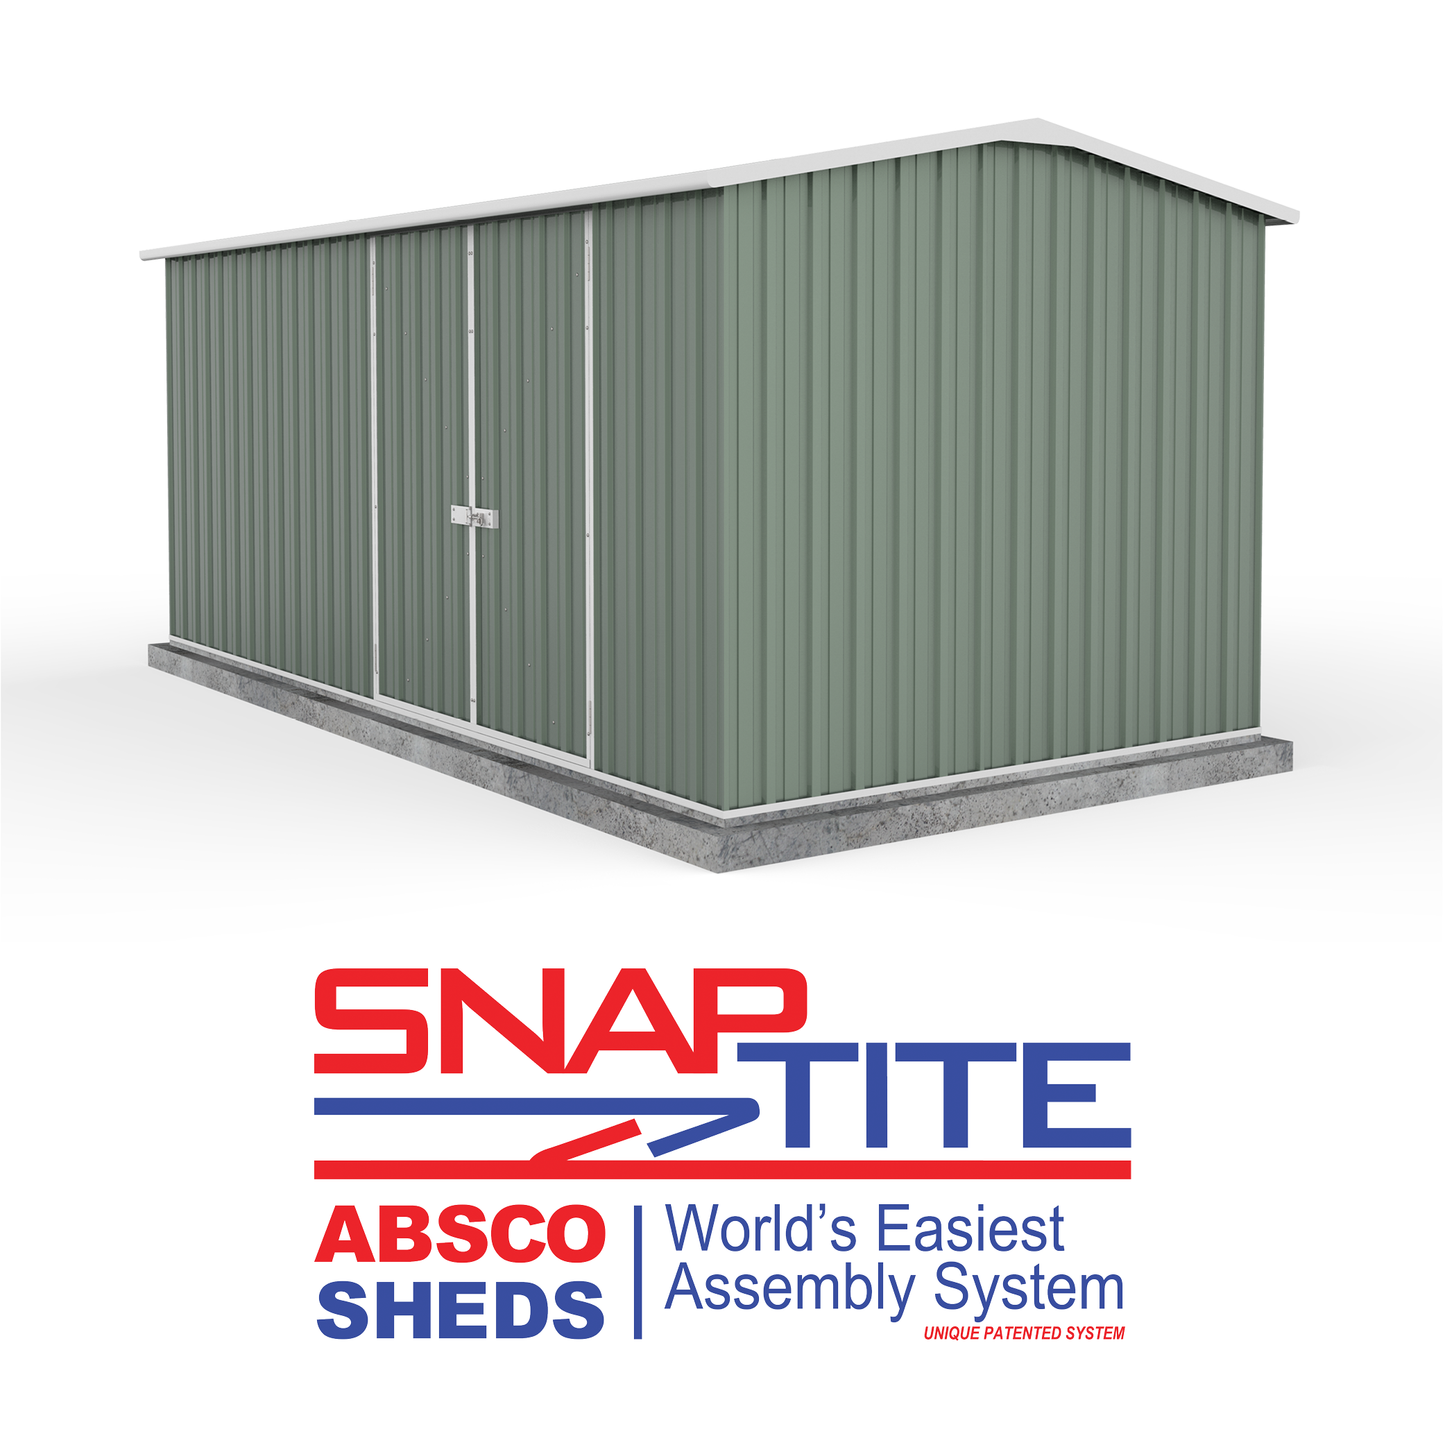 Absco 4.48mW x 3.00mD x 2.06mH Double Door Workshop Shed - Pale Eucalypt